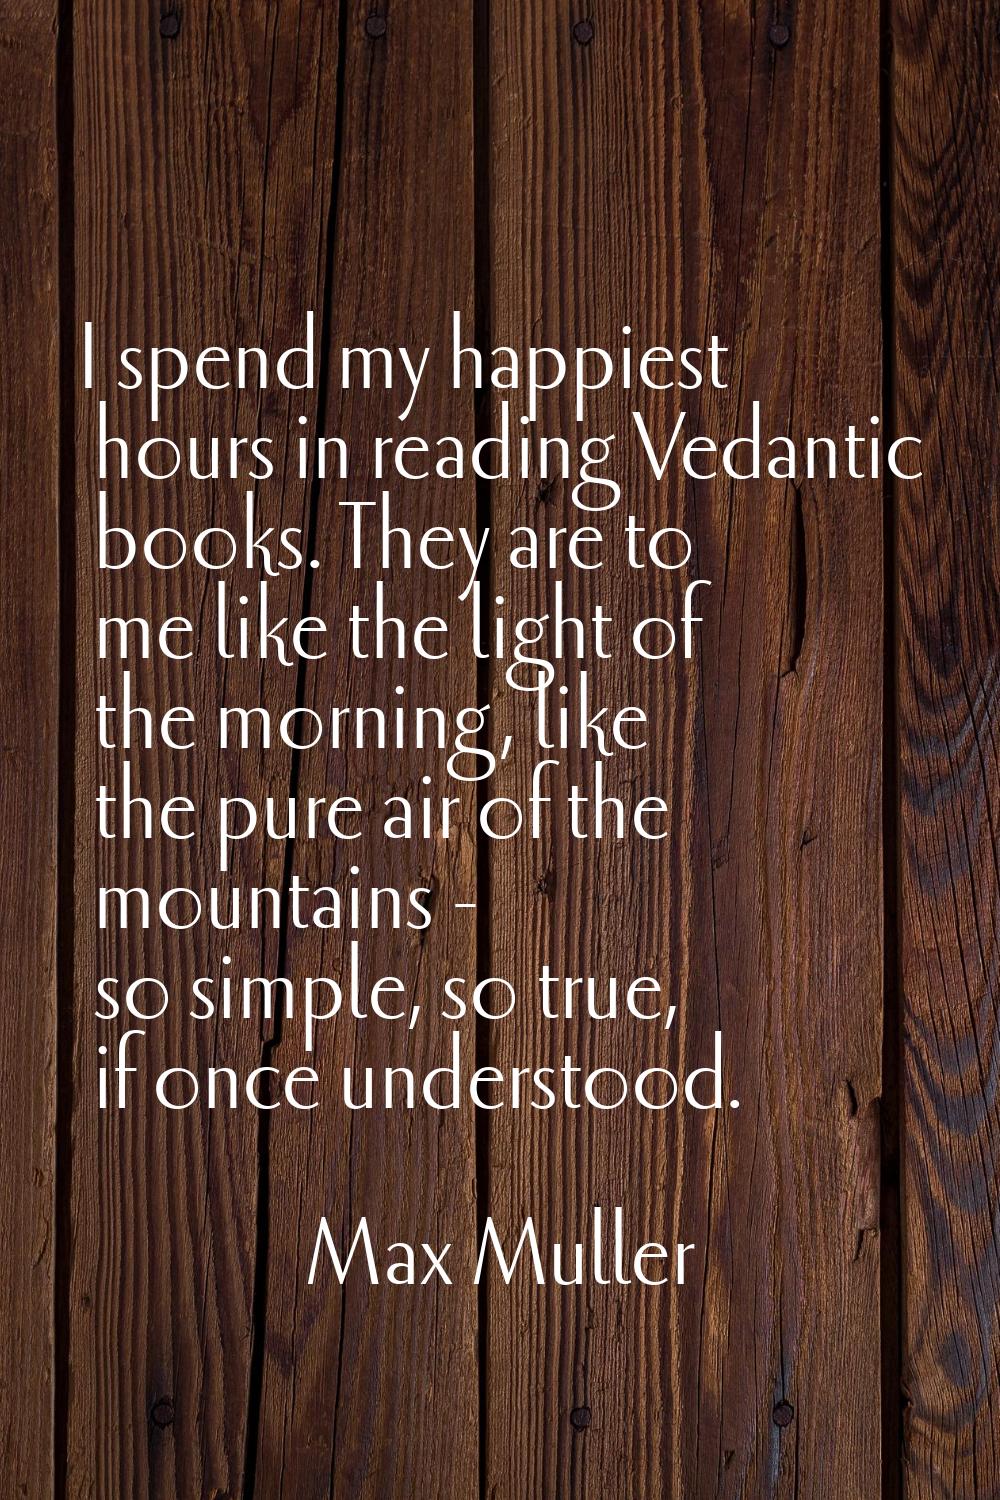 I spend my happiest hours in reading Vedantic books. They are to me like the light of the morning, 